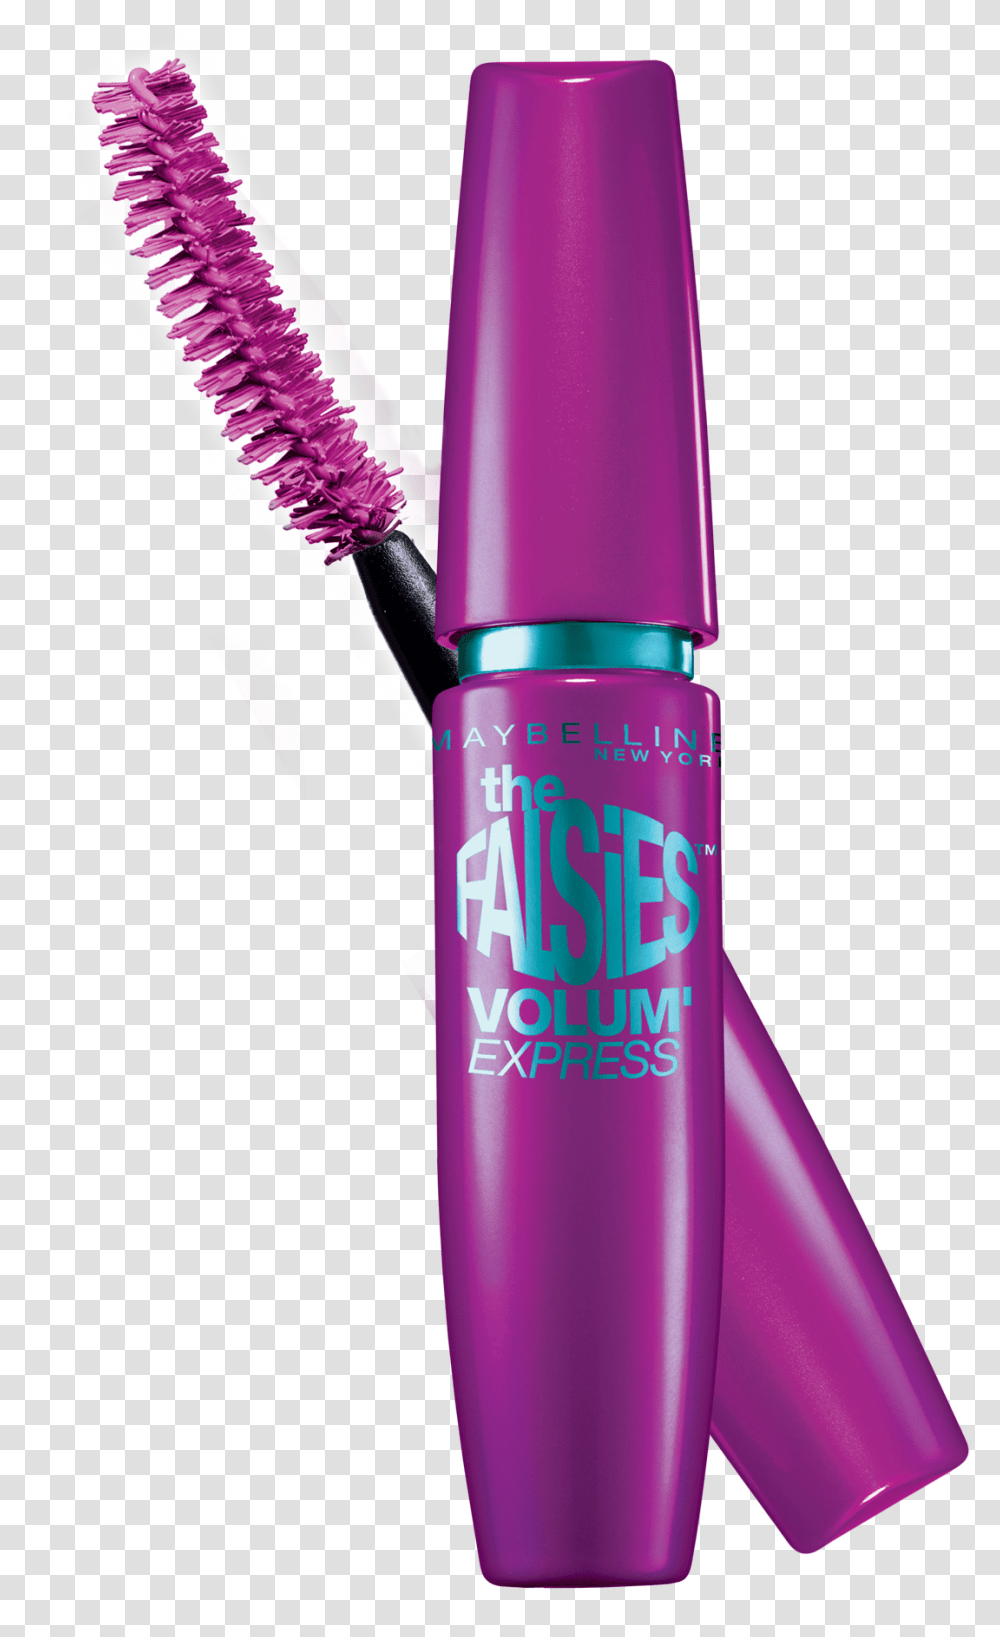 Maybelline Falsies Mascara Coupon Maybelline The Falsies Volum Express Waterproof, Cosmetics Transparent Png